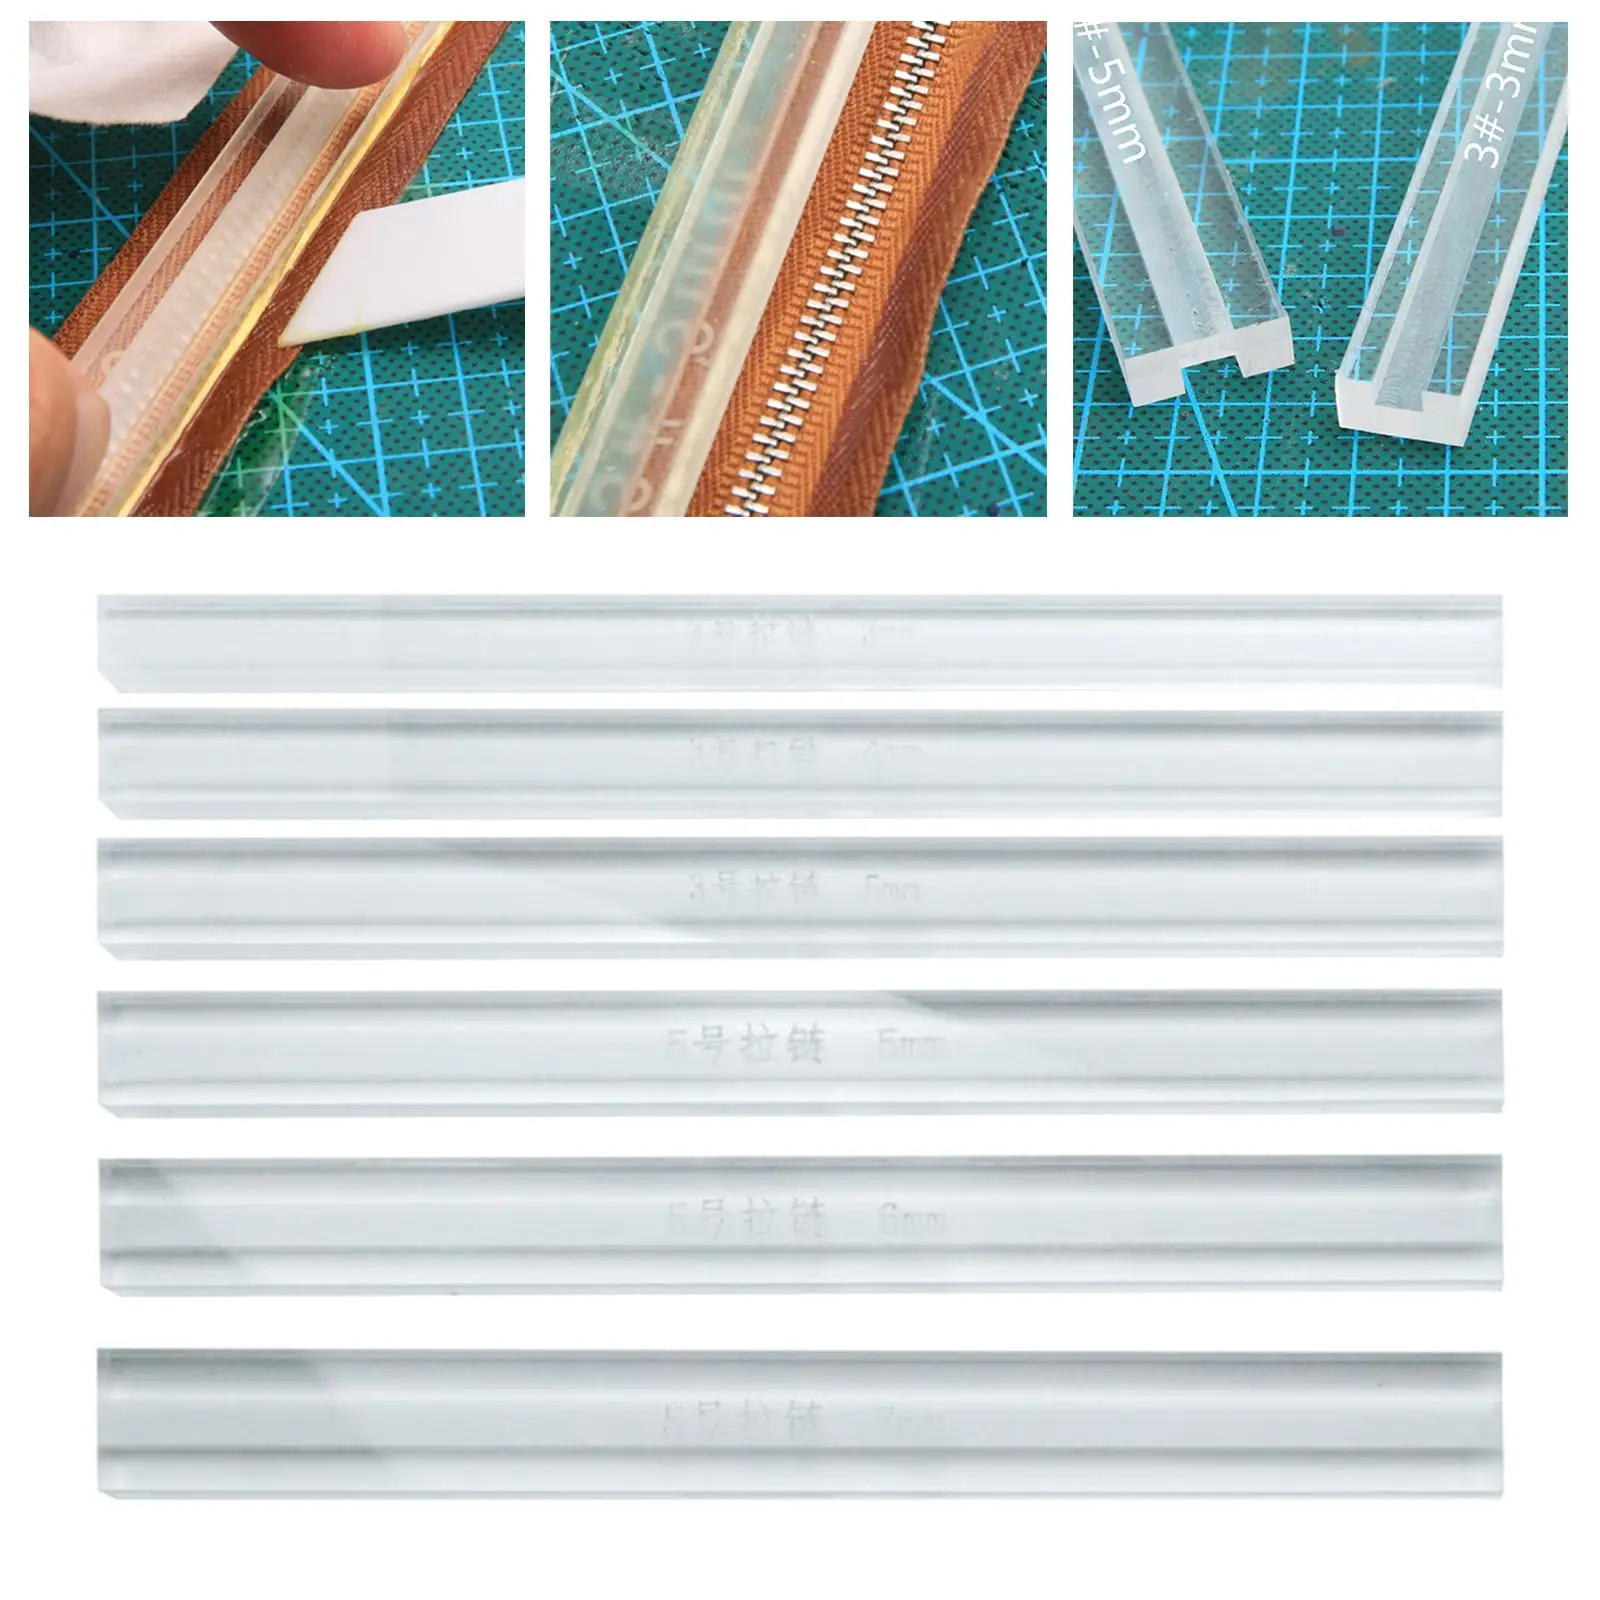 Acrylic Template Sewing Accessories for Leather 3# 5# Zipper Installation Installer Wallet Fix DIY Tool Repair Kit